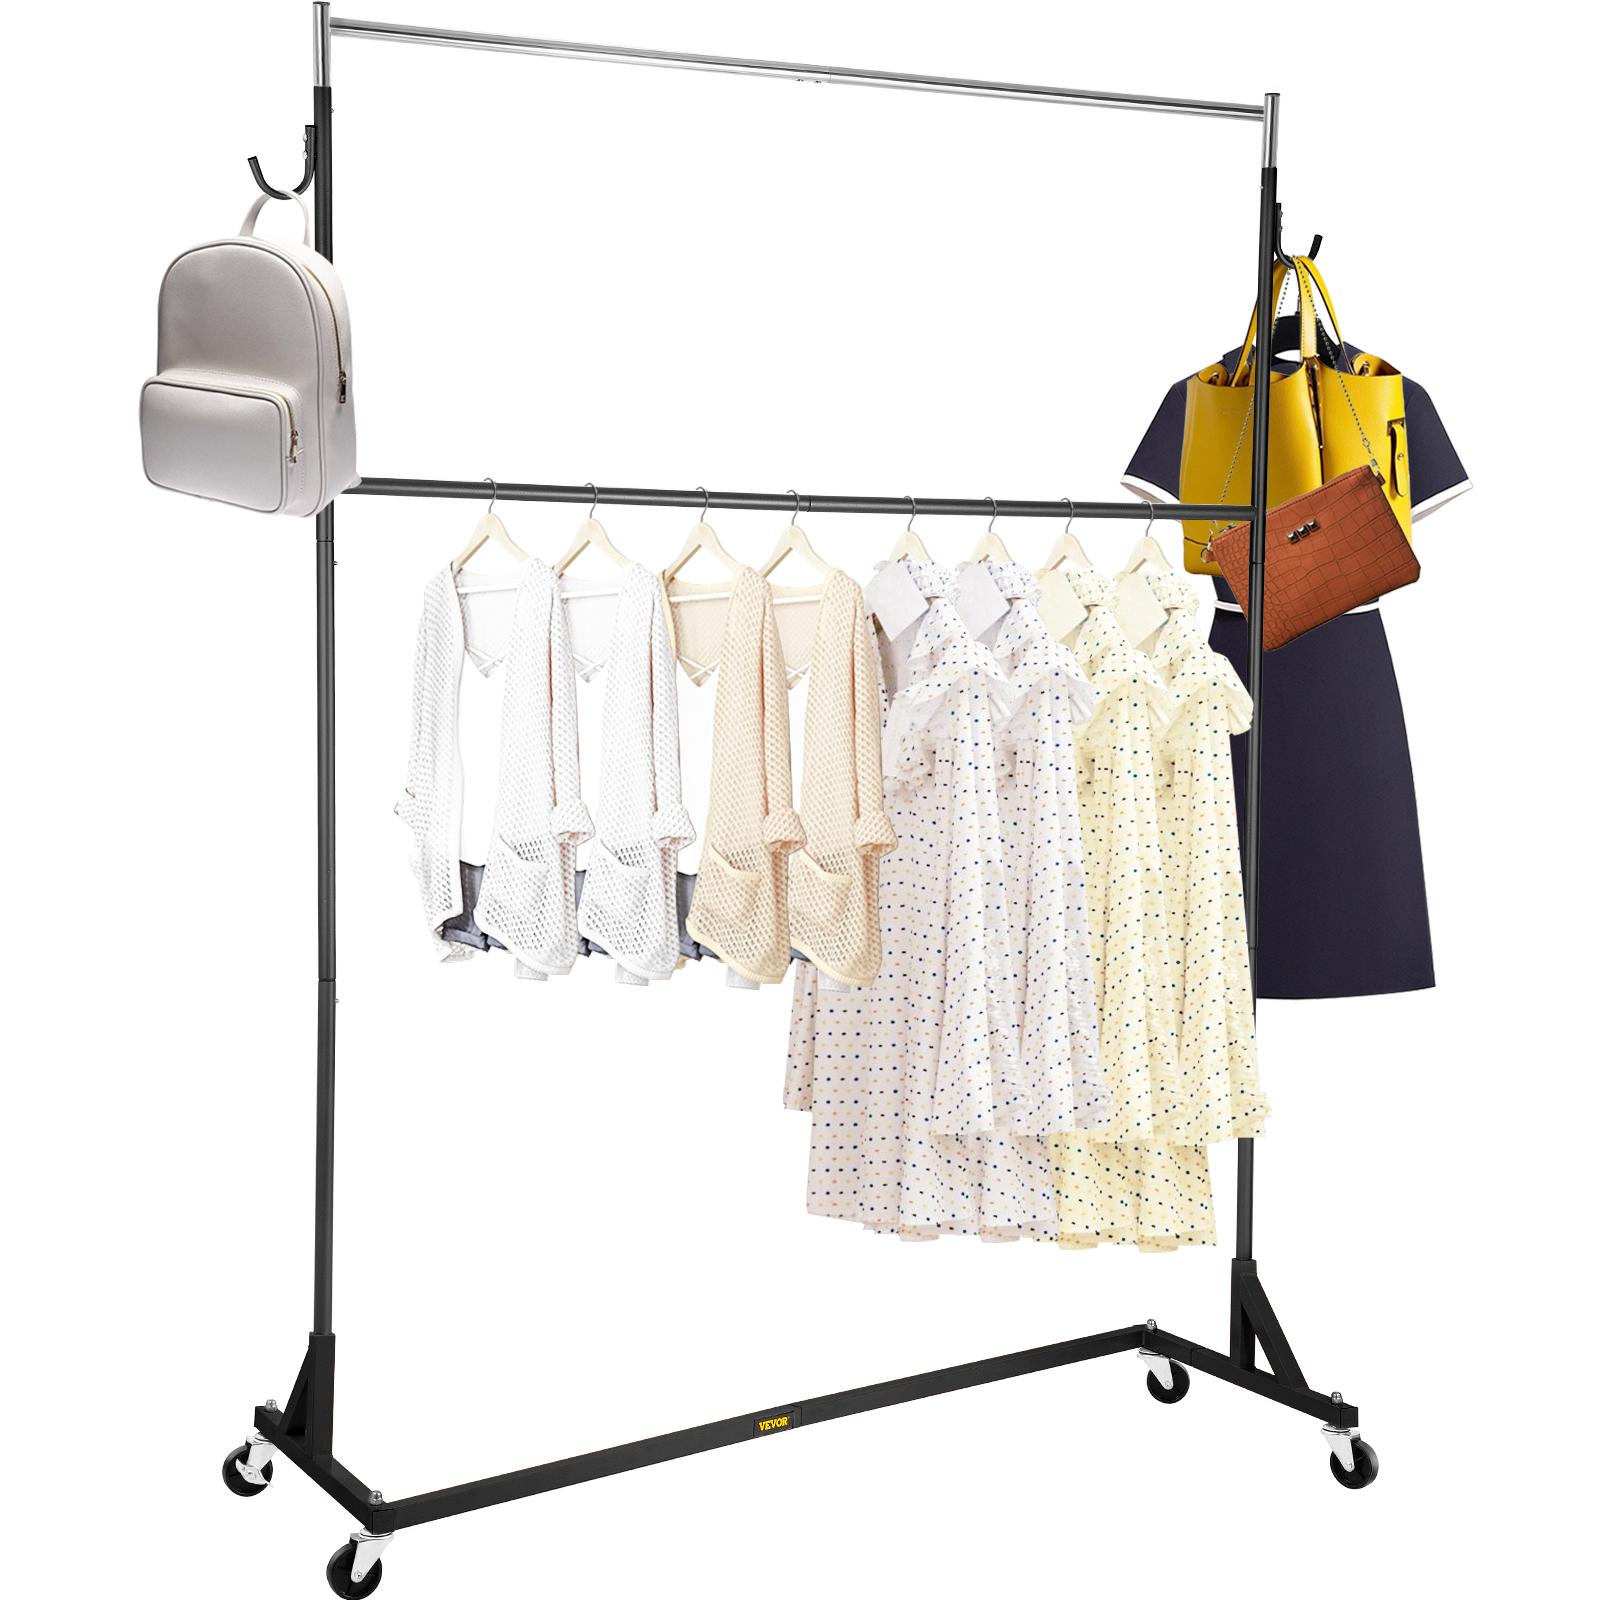 Heavy Duty Commercial Grade Single Bar Z Rack Clothing Garment Clothes Rolling 